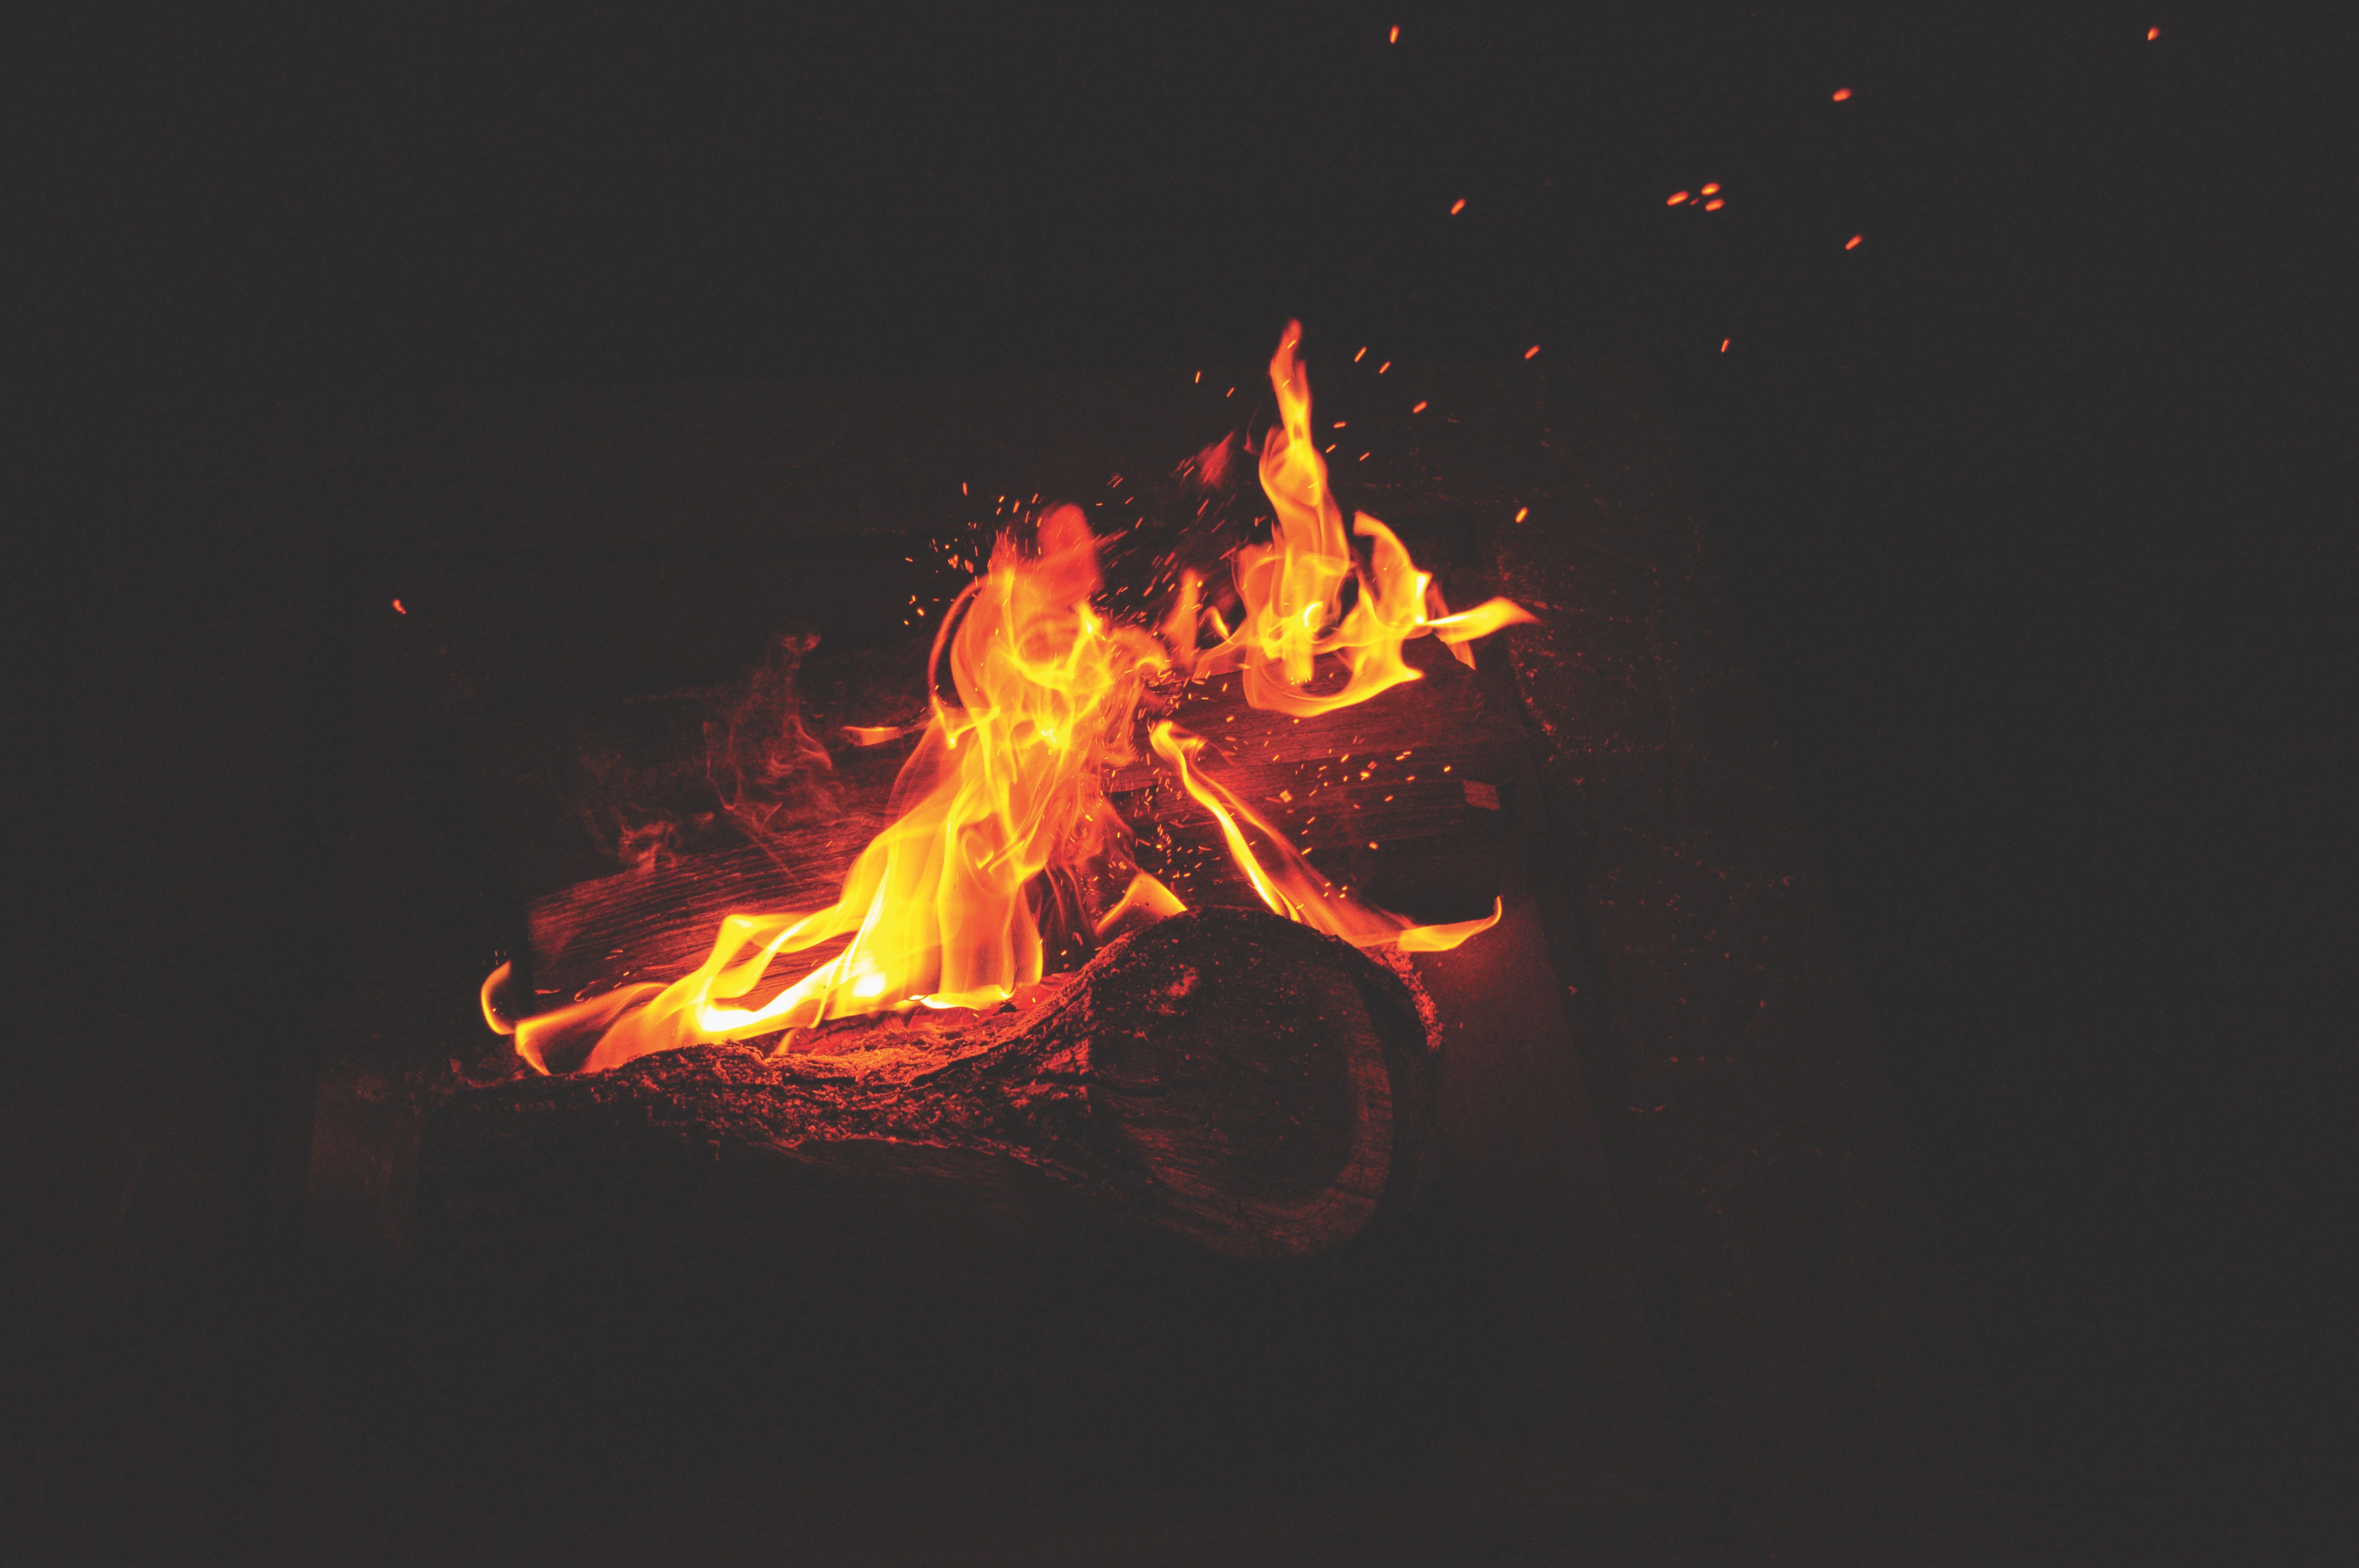 6016x4000 log, orange, darkness, yellow, wood, bon fire, spark, burn, flame, camping, ember, night, black, kindle, camp fire, hot, sparks, Free image, dark, color, fire